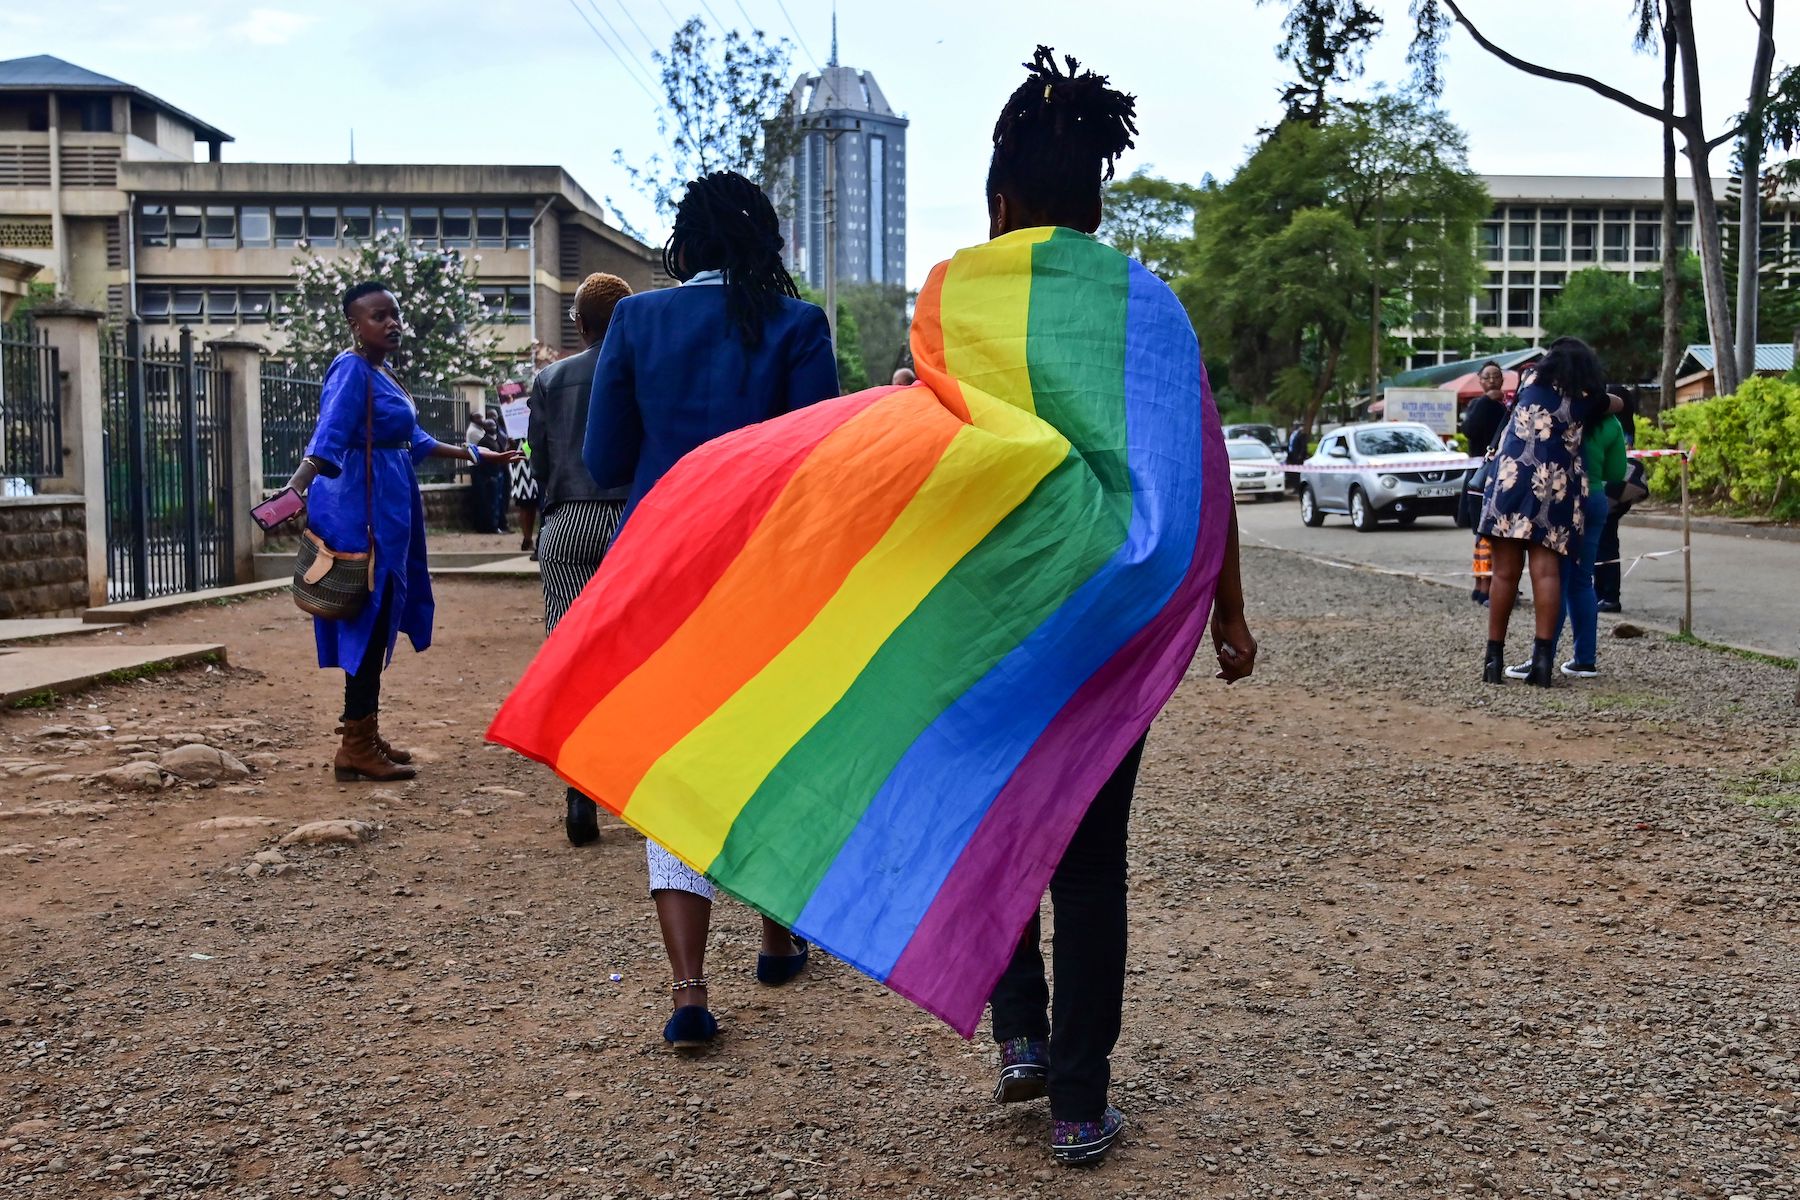 Ghana Has Passed A Bill That Would Make It A Crime For People To Identify As LGBTQ